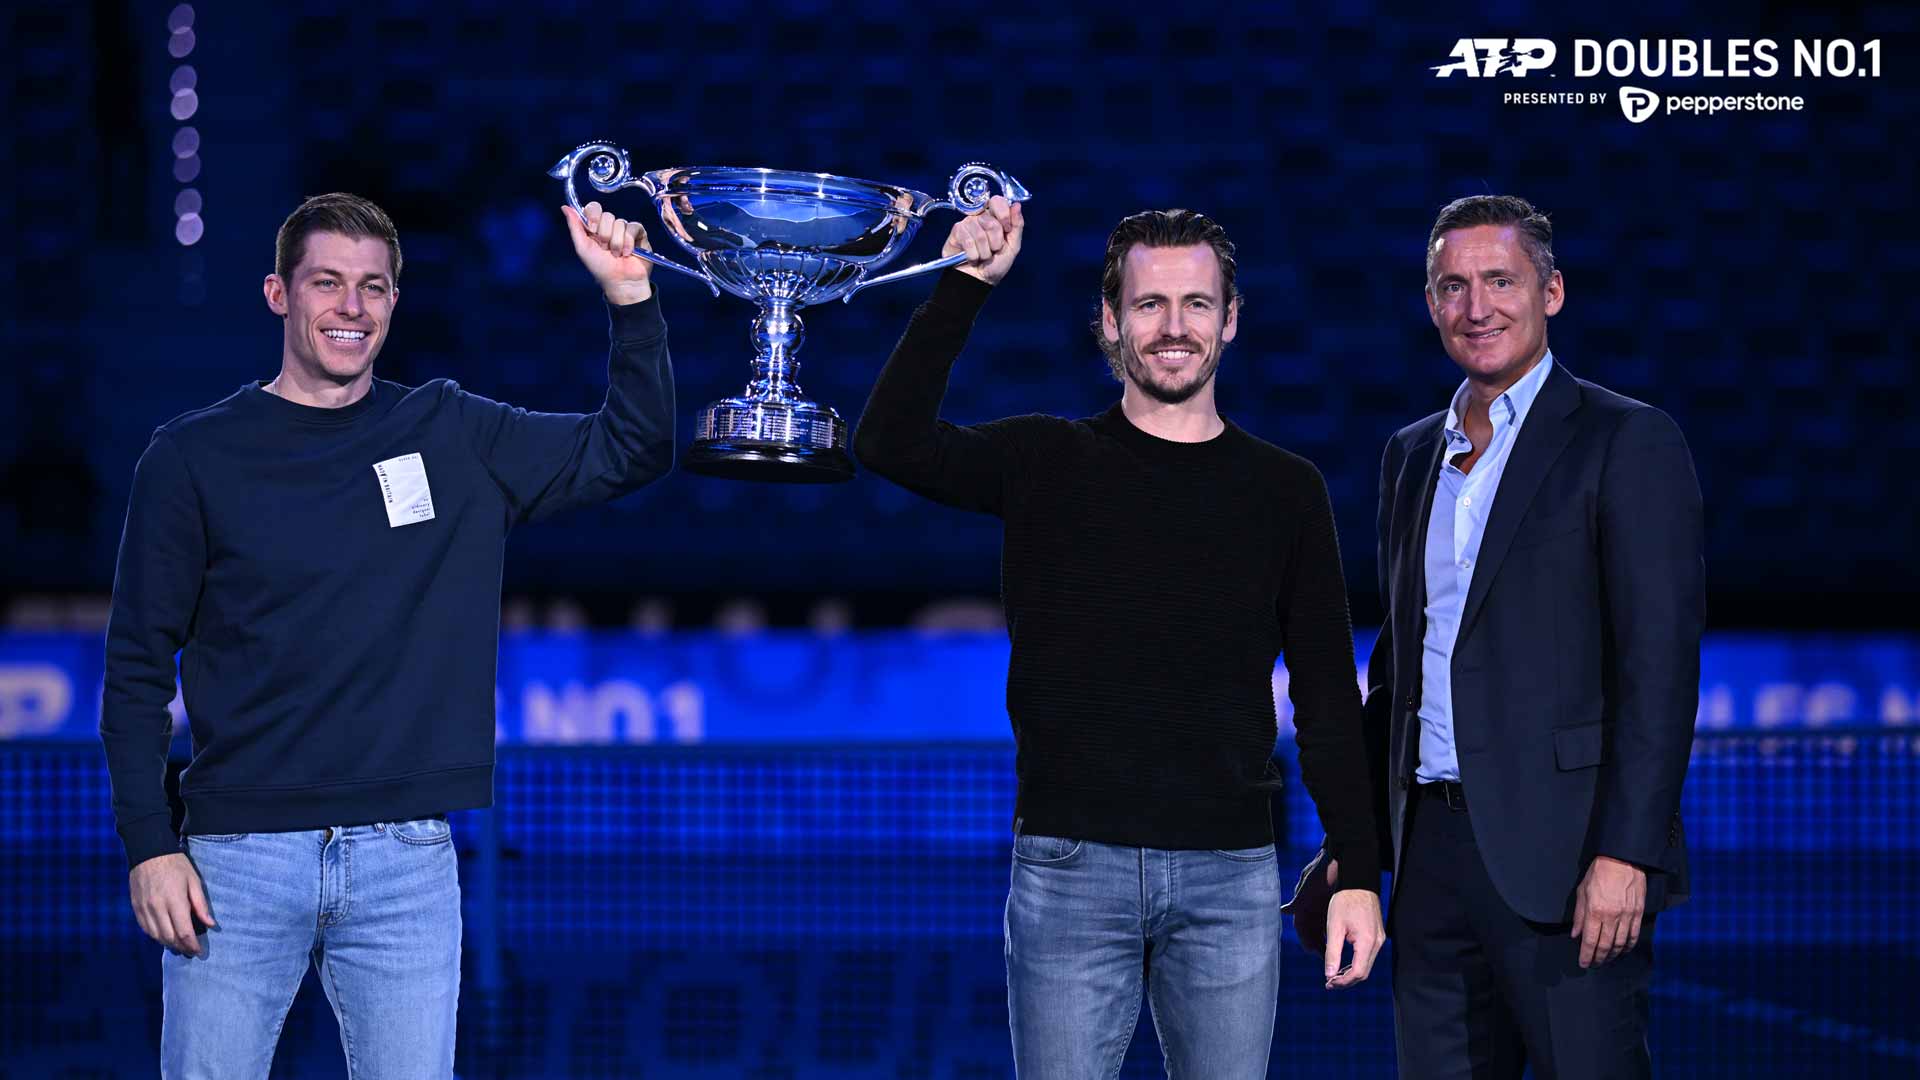 Neal Skupski and Wesley Koolhof receive the ATP Doubles No. 1 presented by Pepperstone trophy from ATP Chairman Andrea Gaudenzi on Thursday.